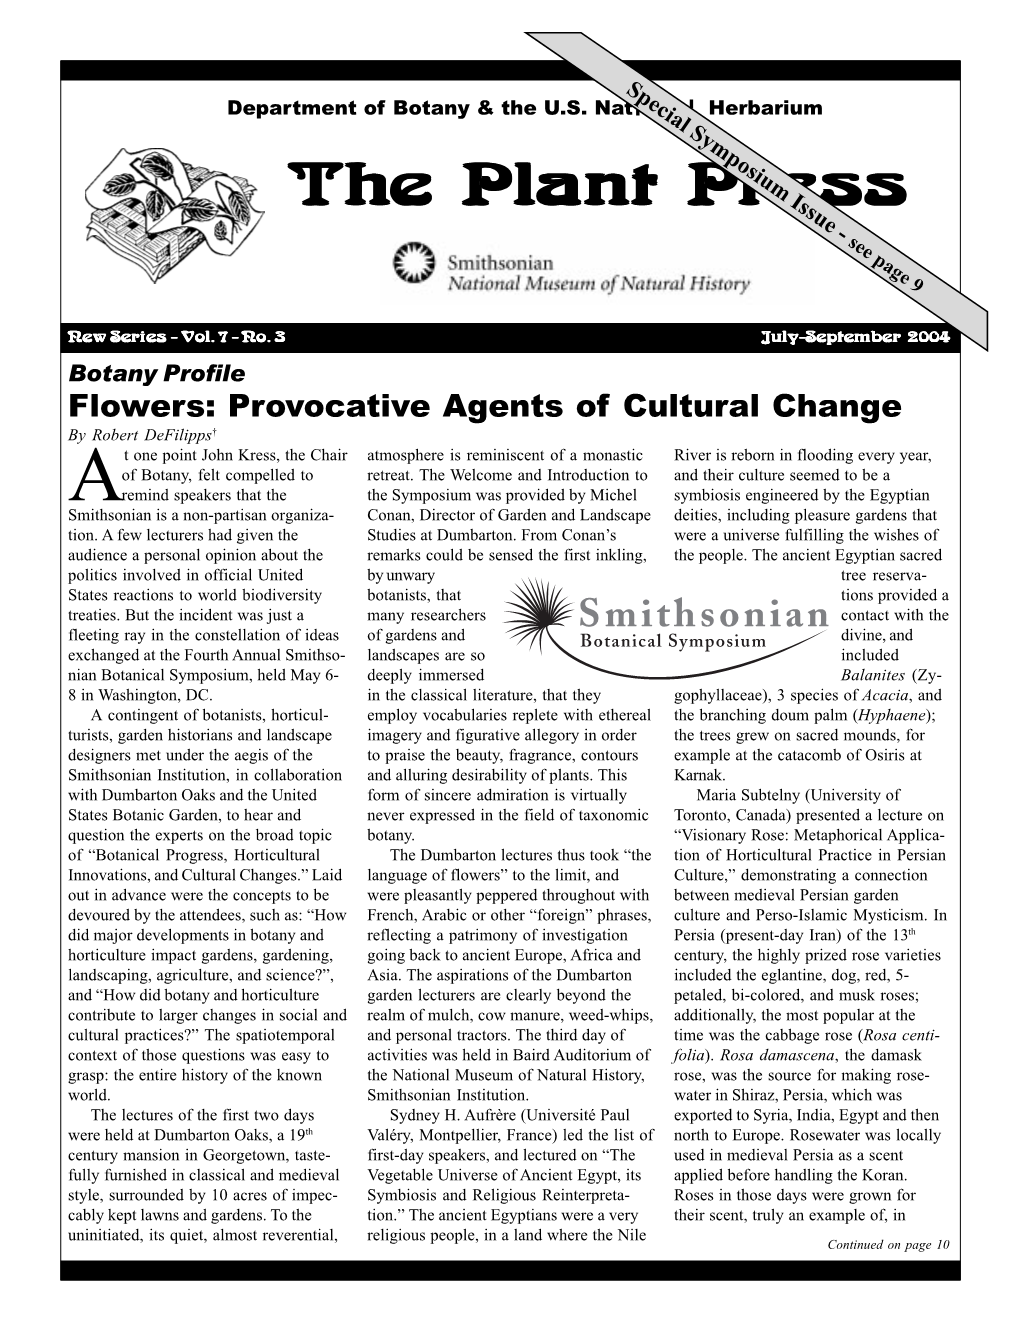 The Plant Press Continued on Page 7 New Series - Vol